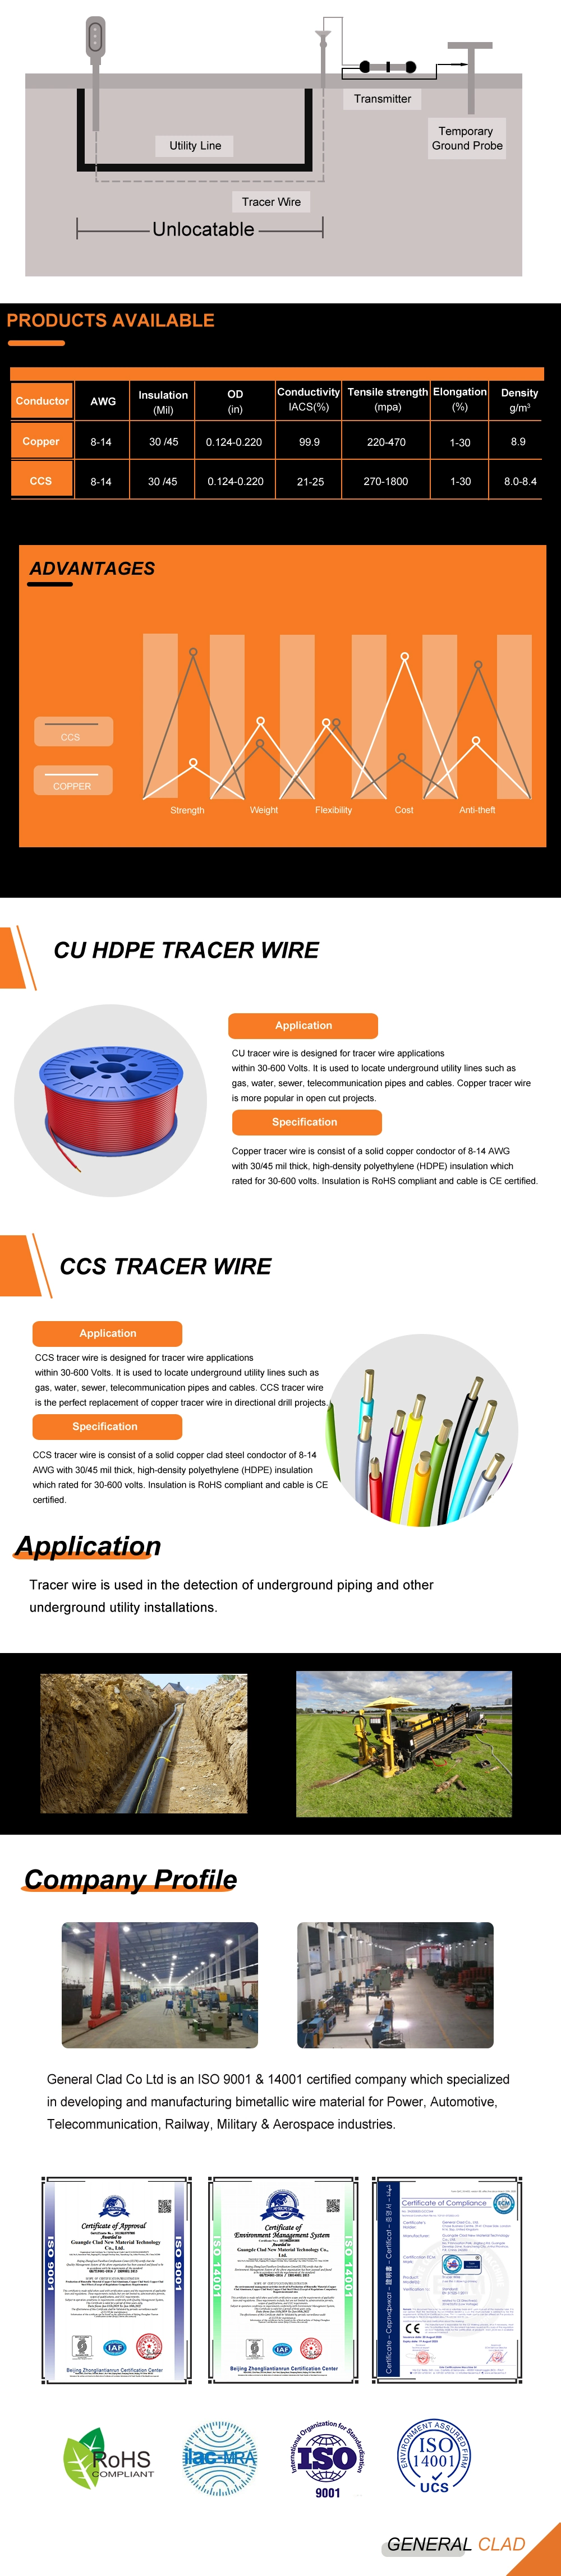 Underground Wire Tracer 10 AWG CUPVC30 Tracer Wire